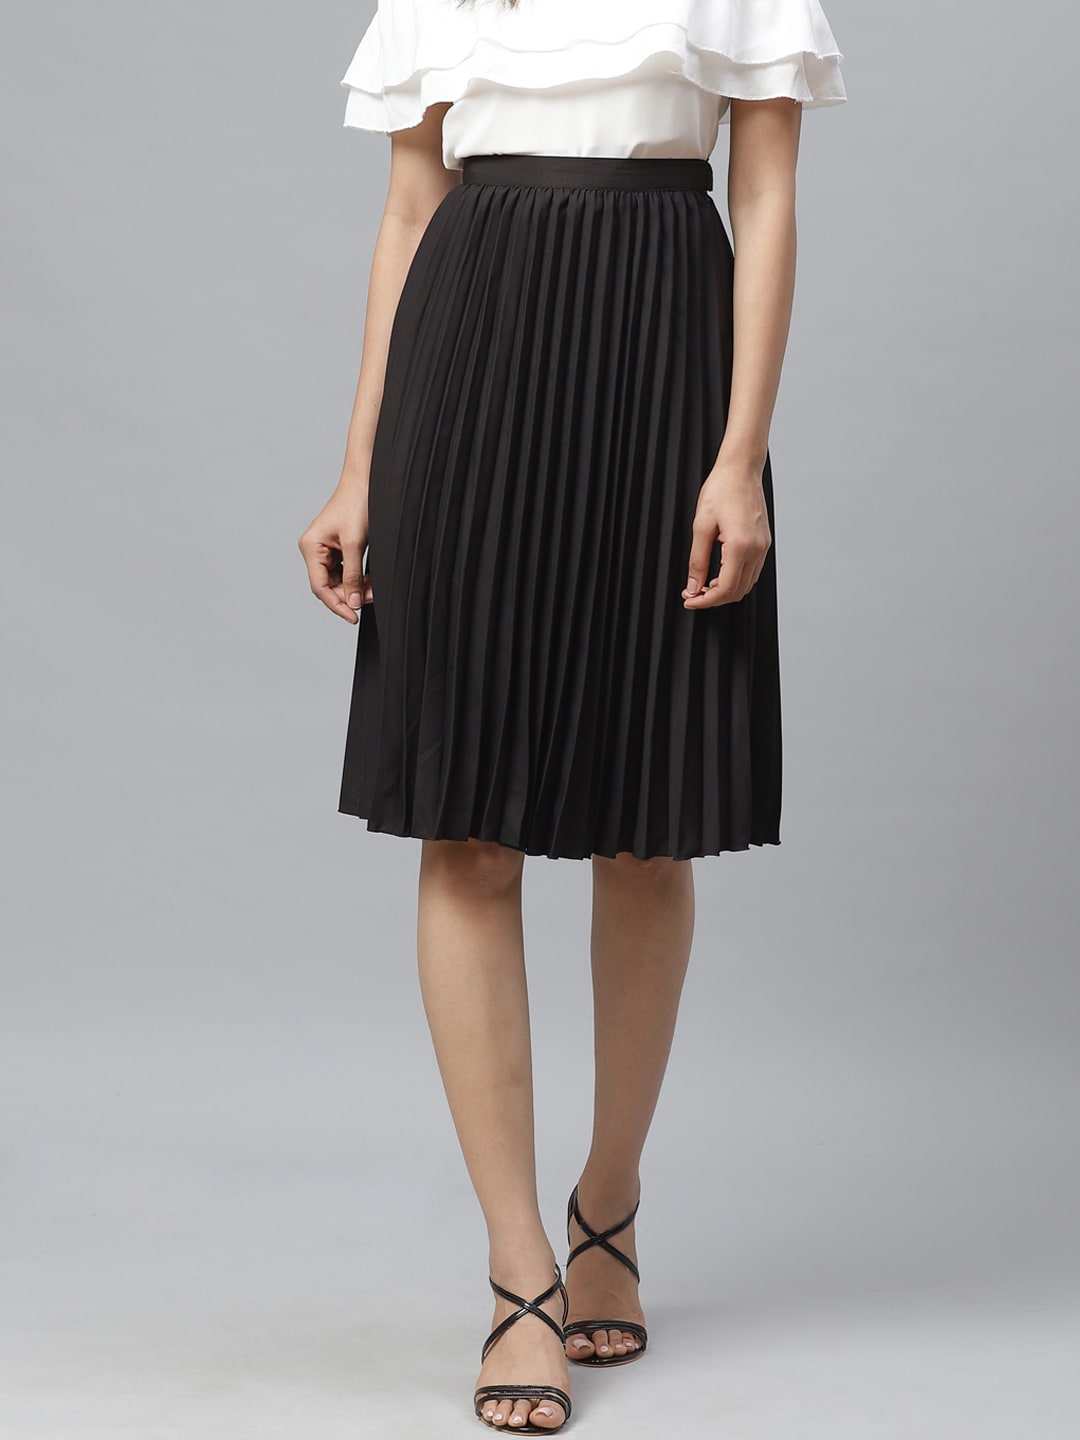 Ives Black Accordion Pleated Flared Skirt Price in India